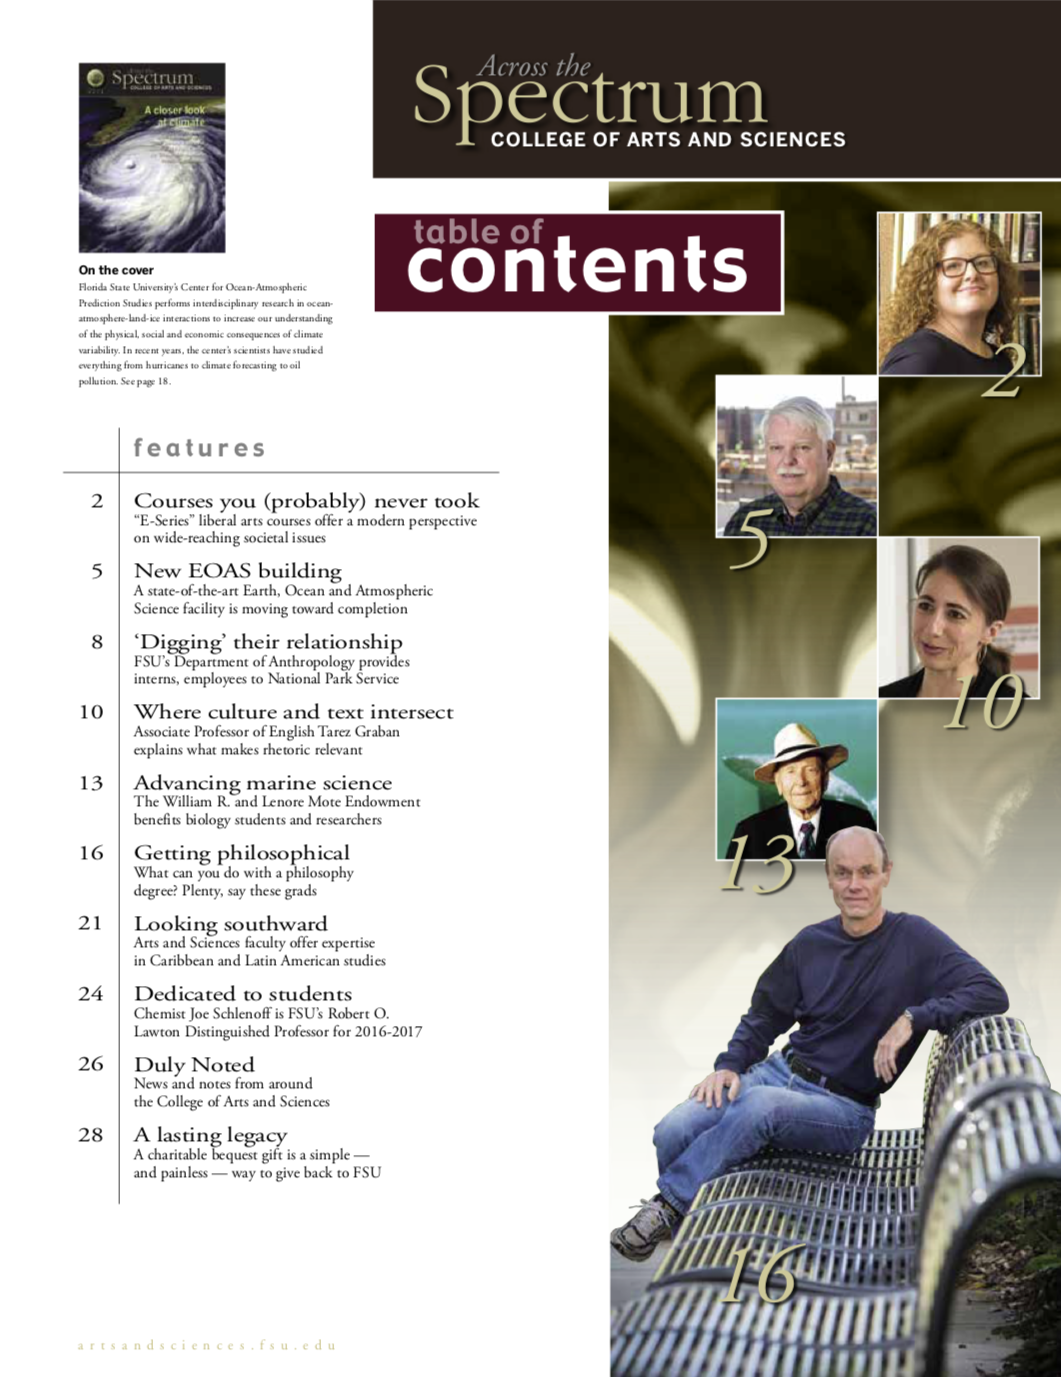 Across-the-spectrum-mag-spring-18-philosophy-features-mahaffey-and-rawling.png